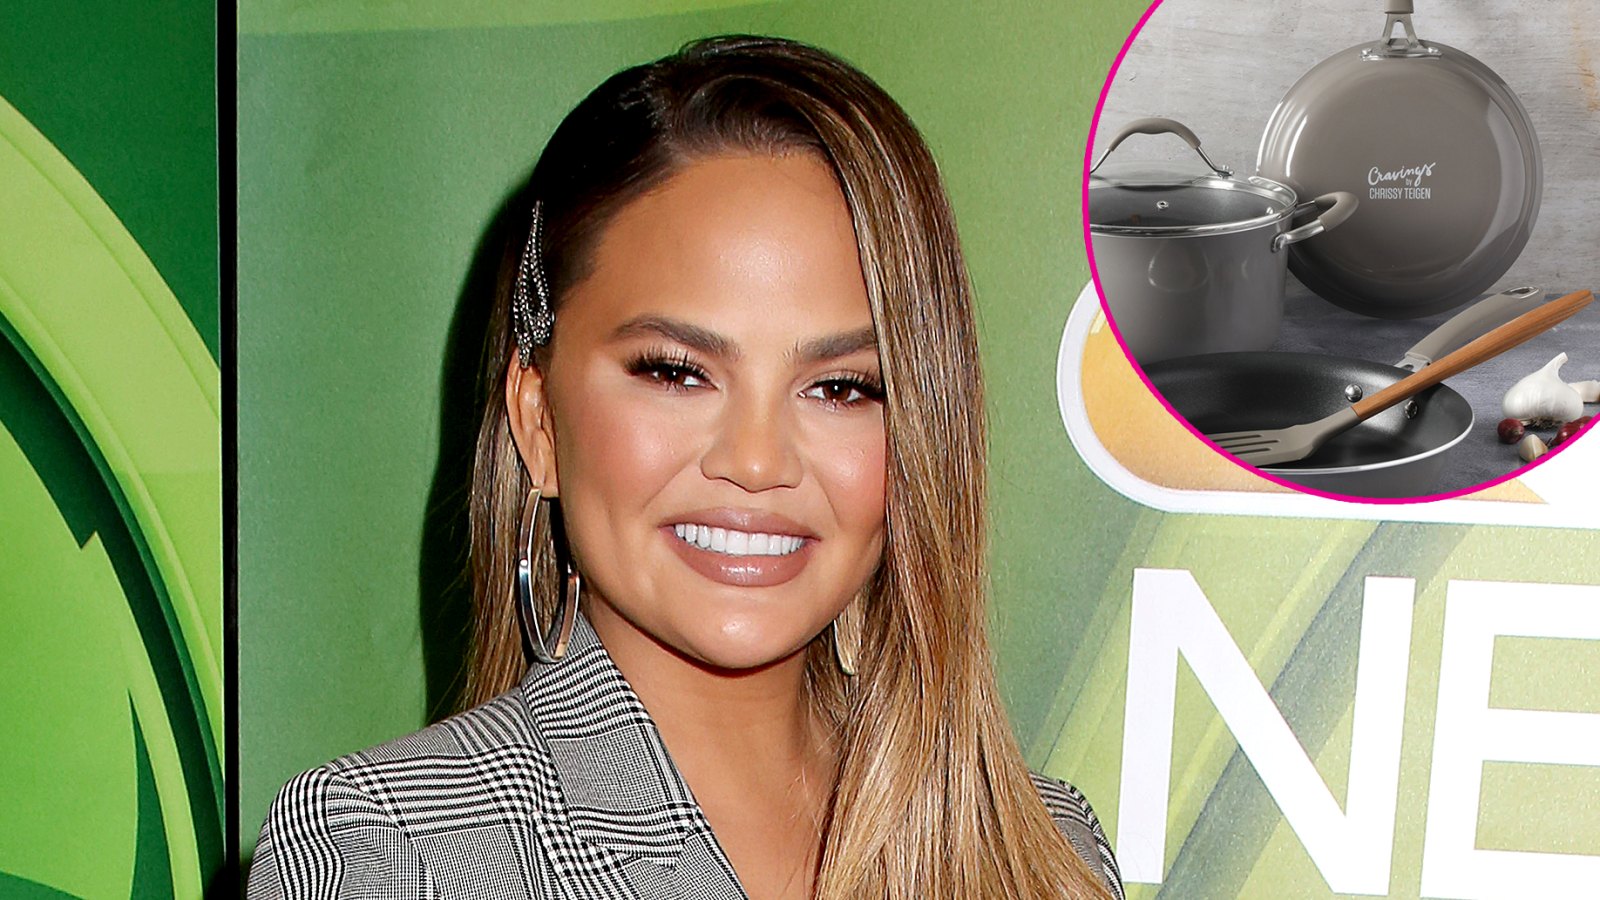 Chrissy Teigen Wants to Donate Items From Her Cookware Collection